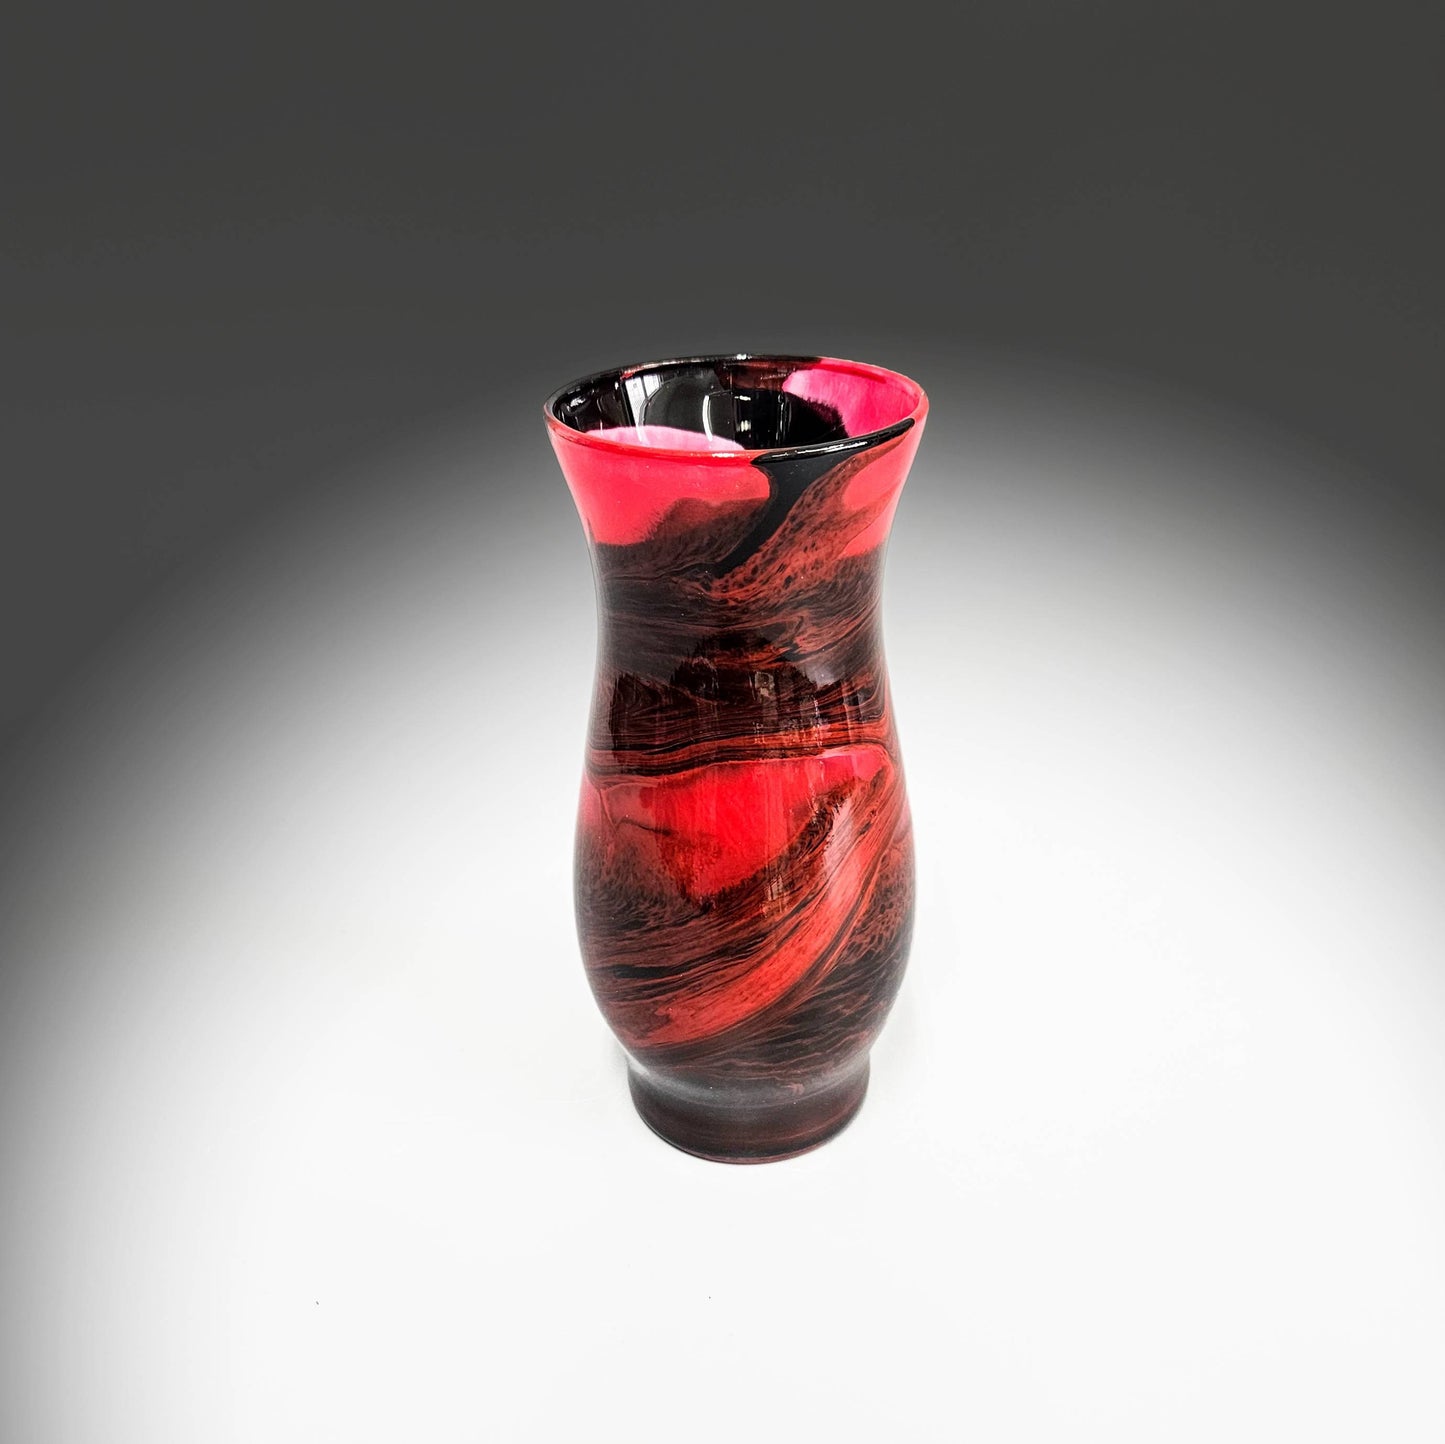 Painted Glass Art Bud Vases in Red and Black | Set of 2